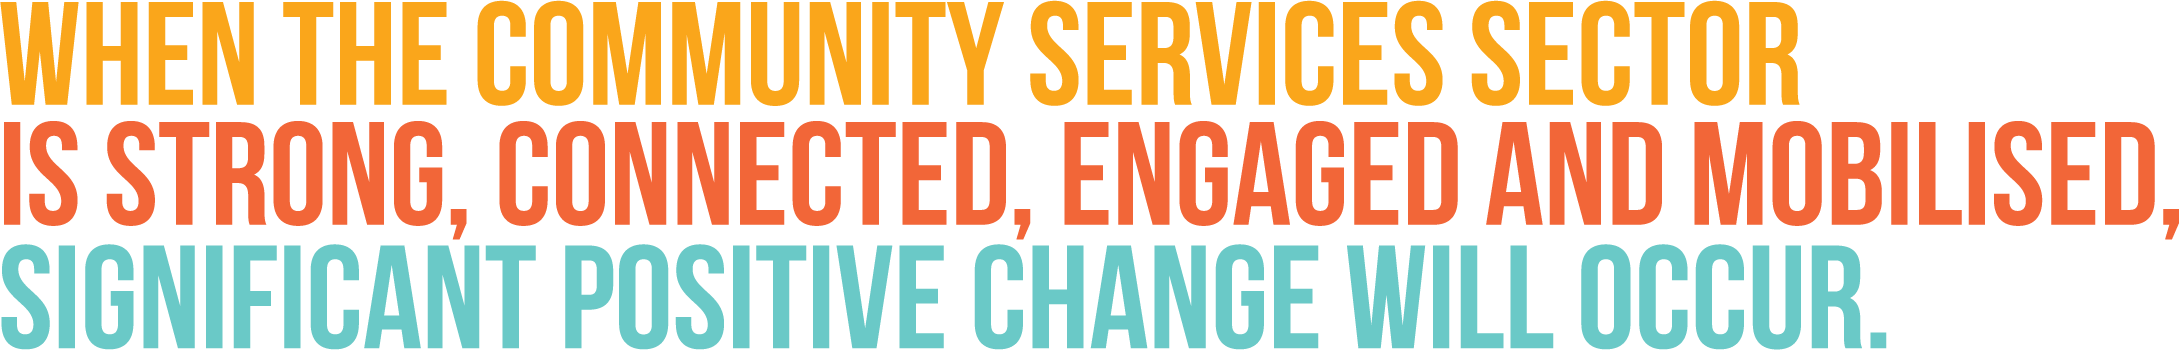 When the community services sectoris strong, connected, engaged and mobilised,significant positive change will occur.